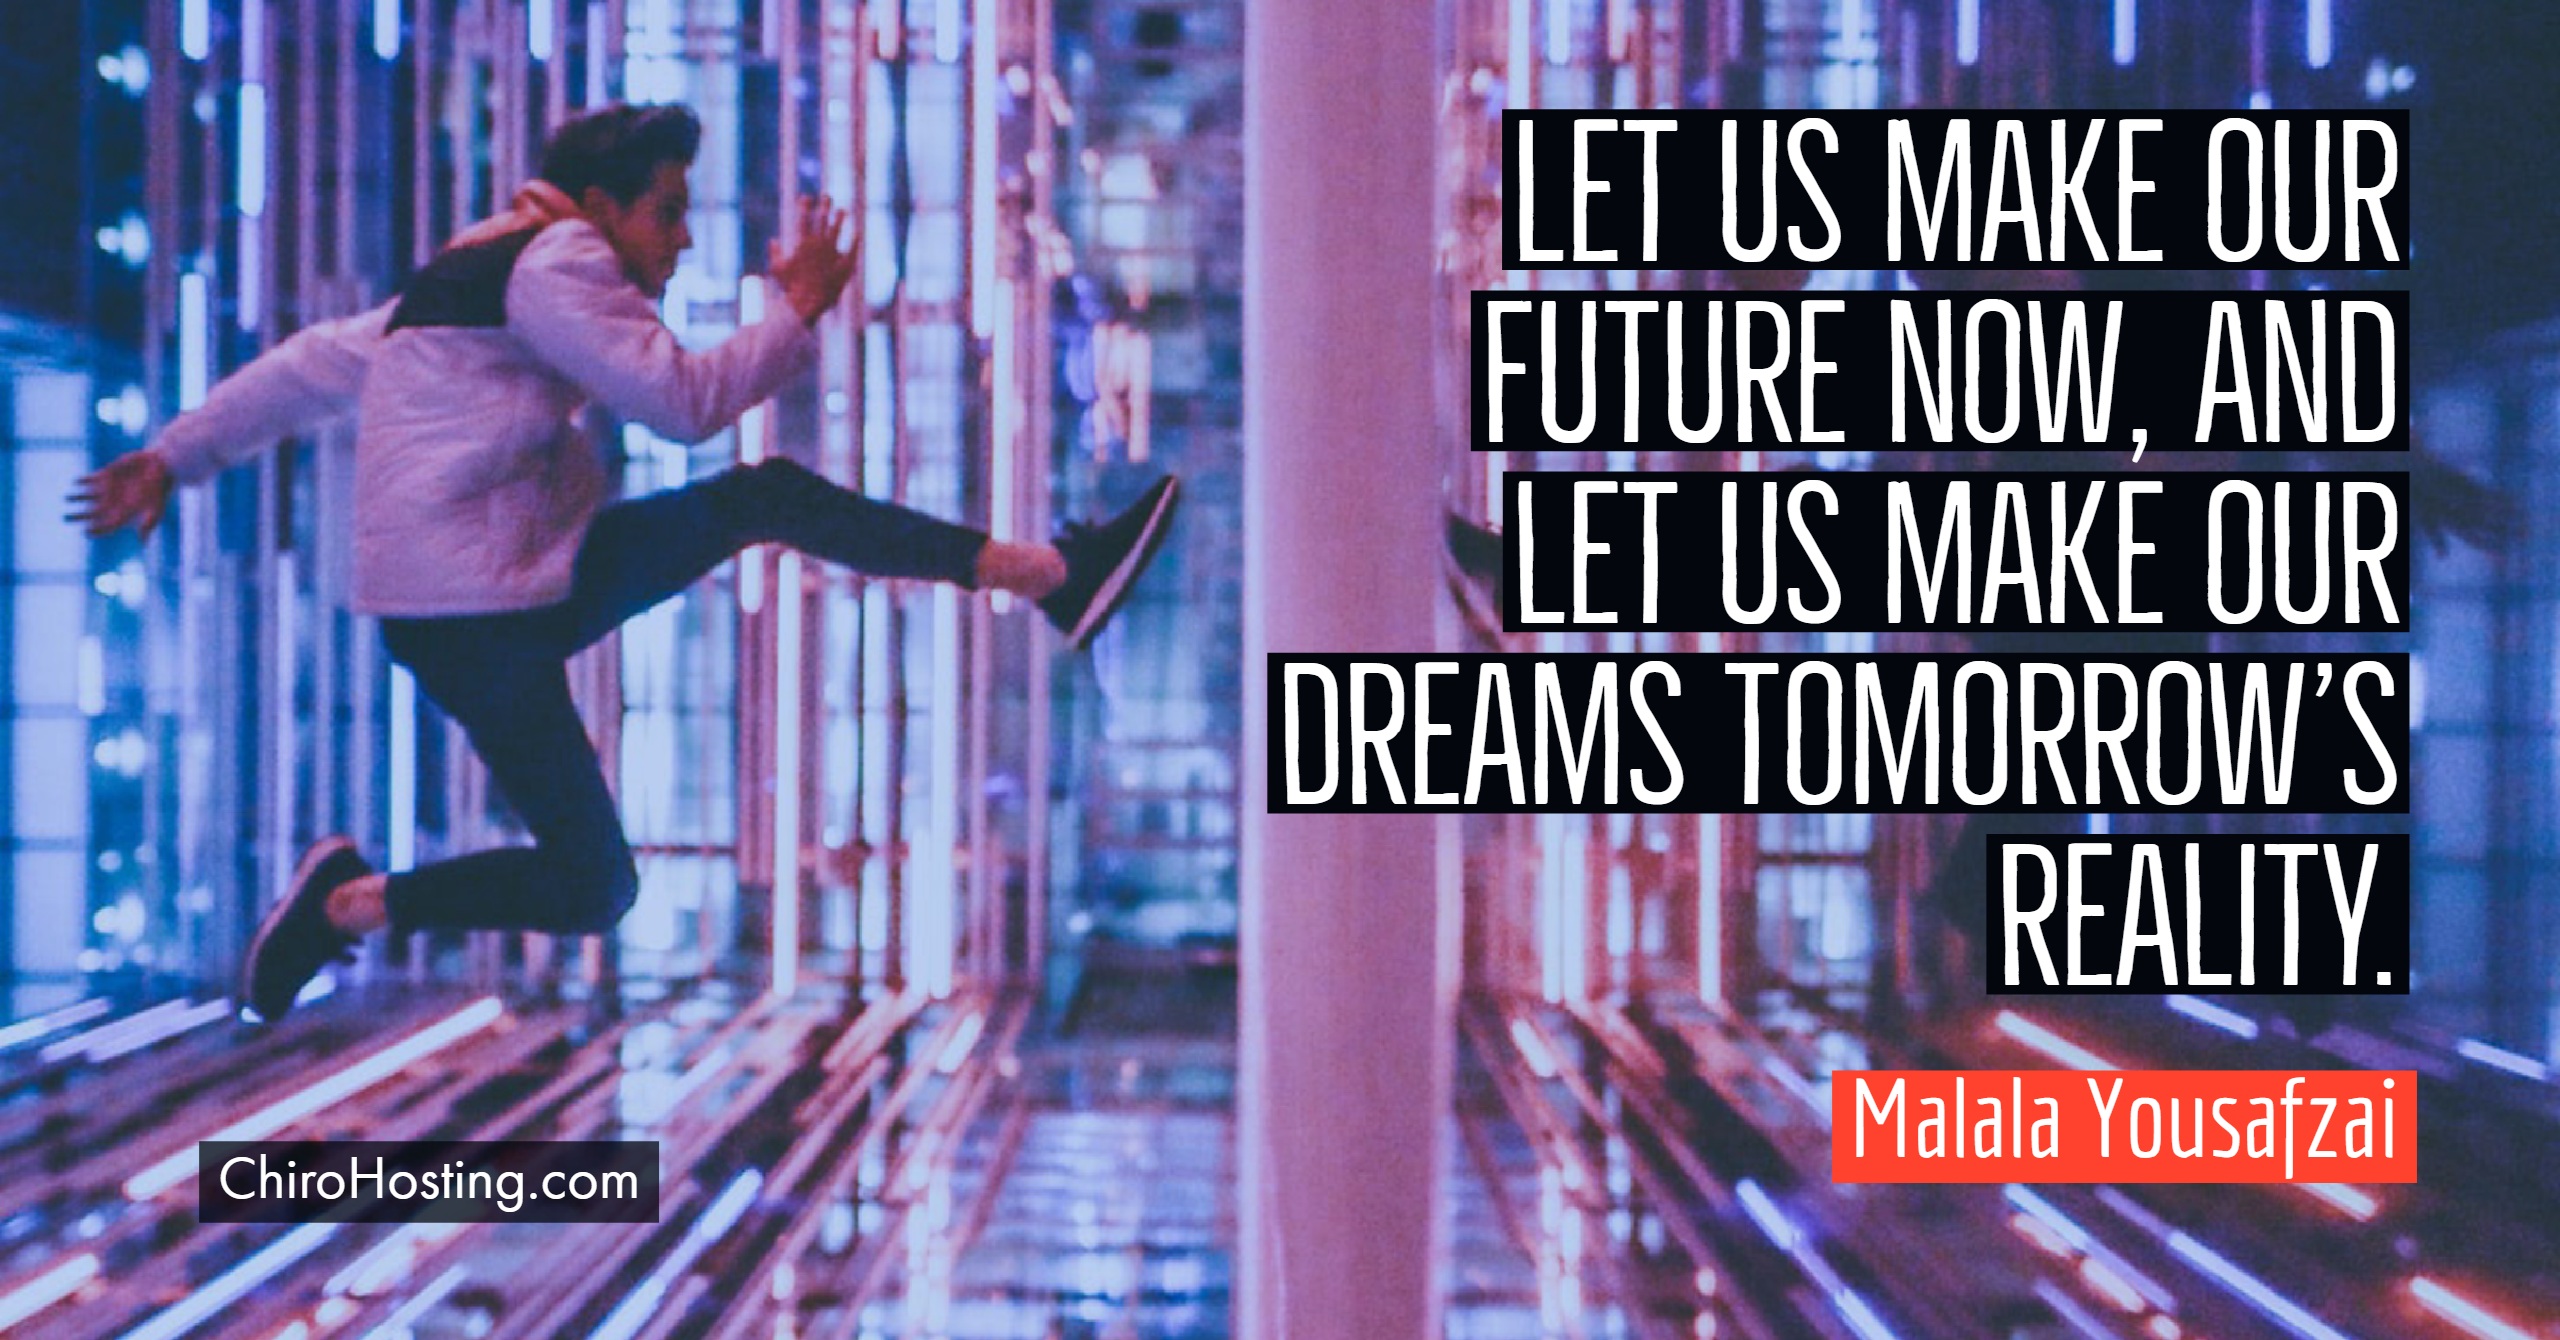 Let Us Make Our Future Now, and Let Us Make Our Dreams Tomorrow's Reality